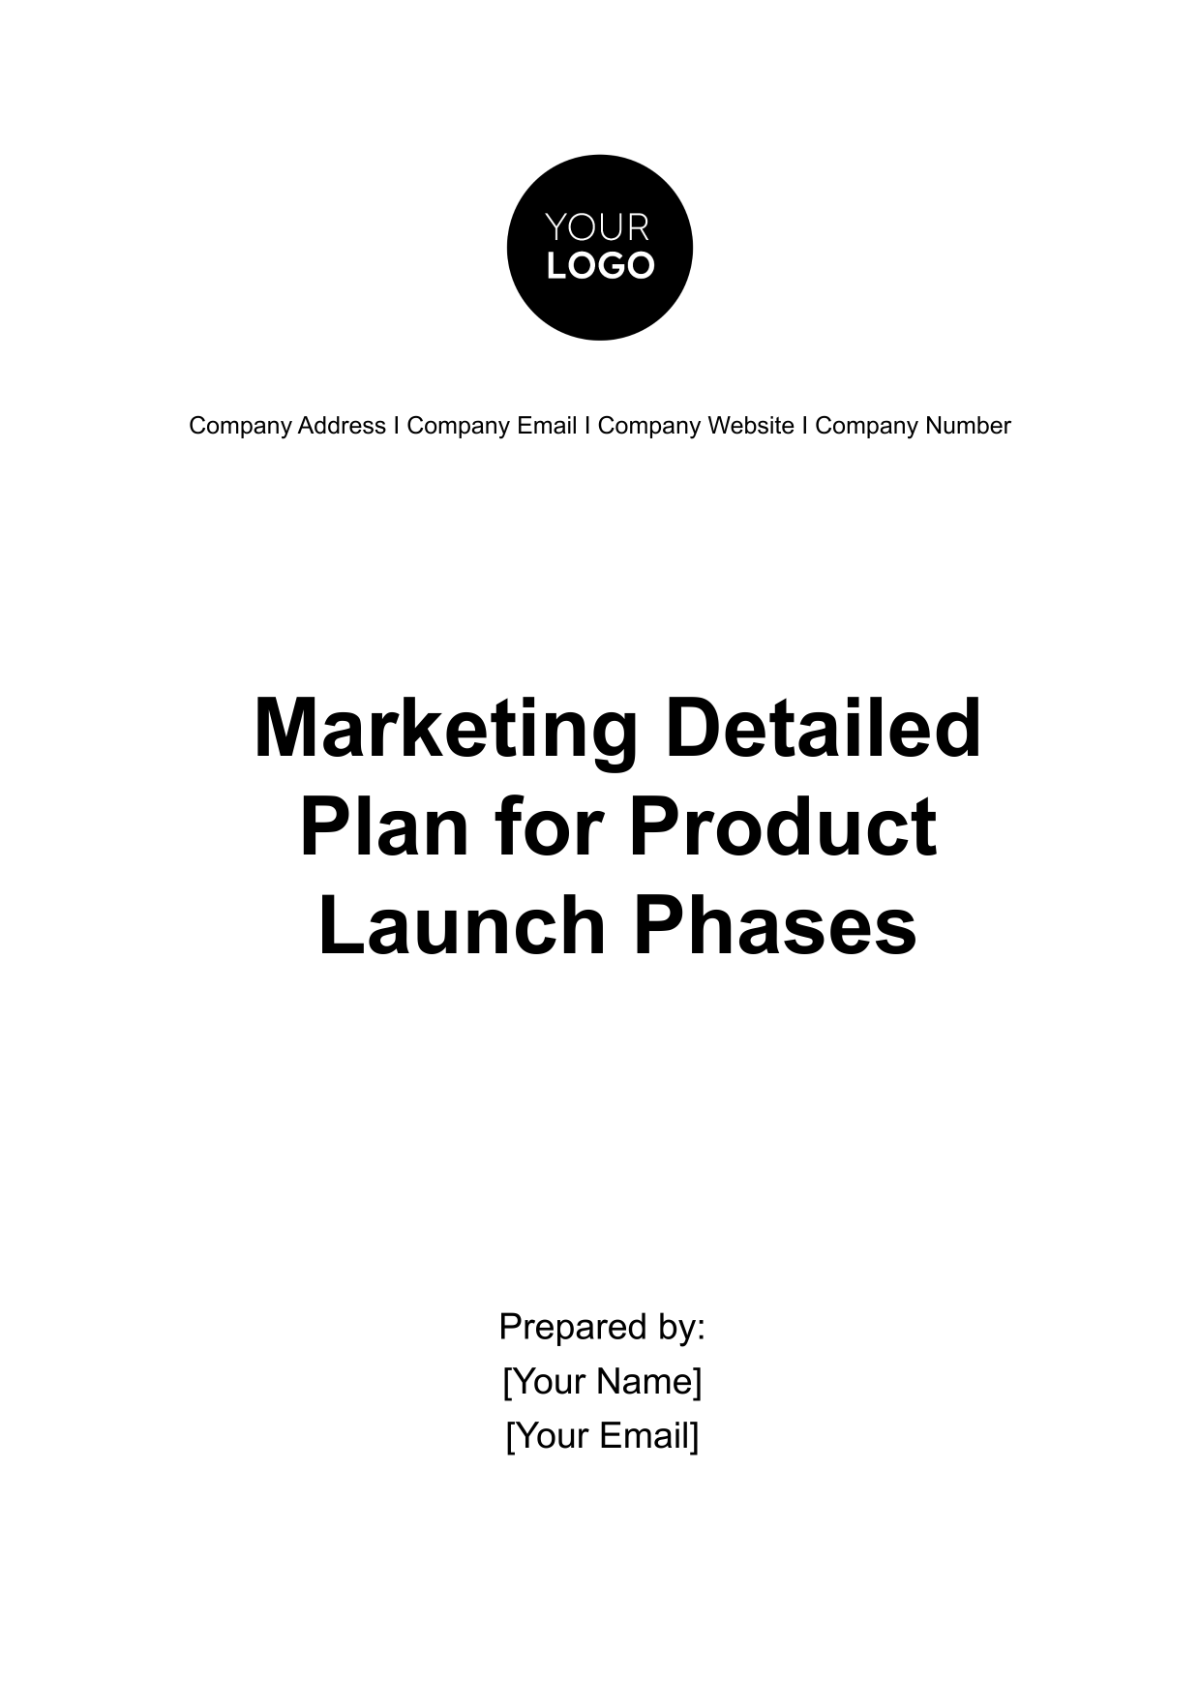 Free Marketing Detailed Plan for Product Launch Phases Template